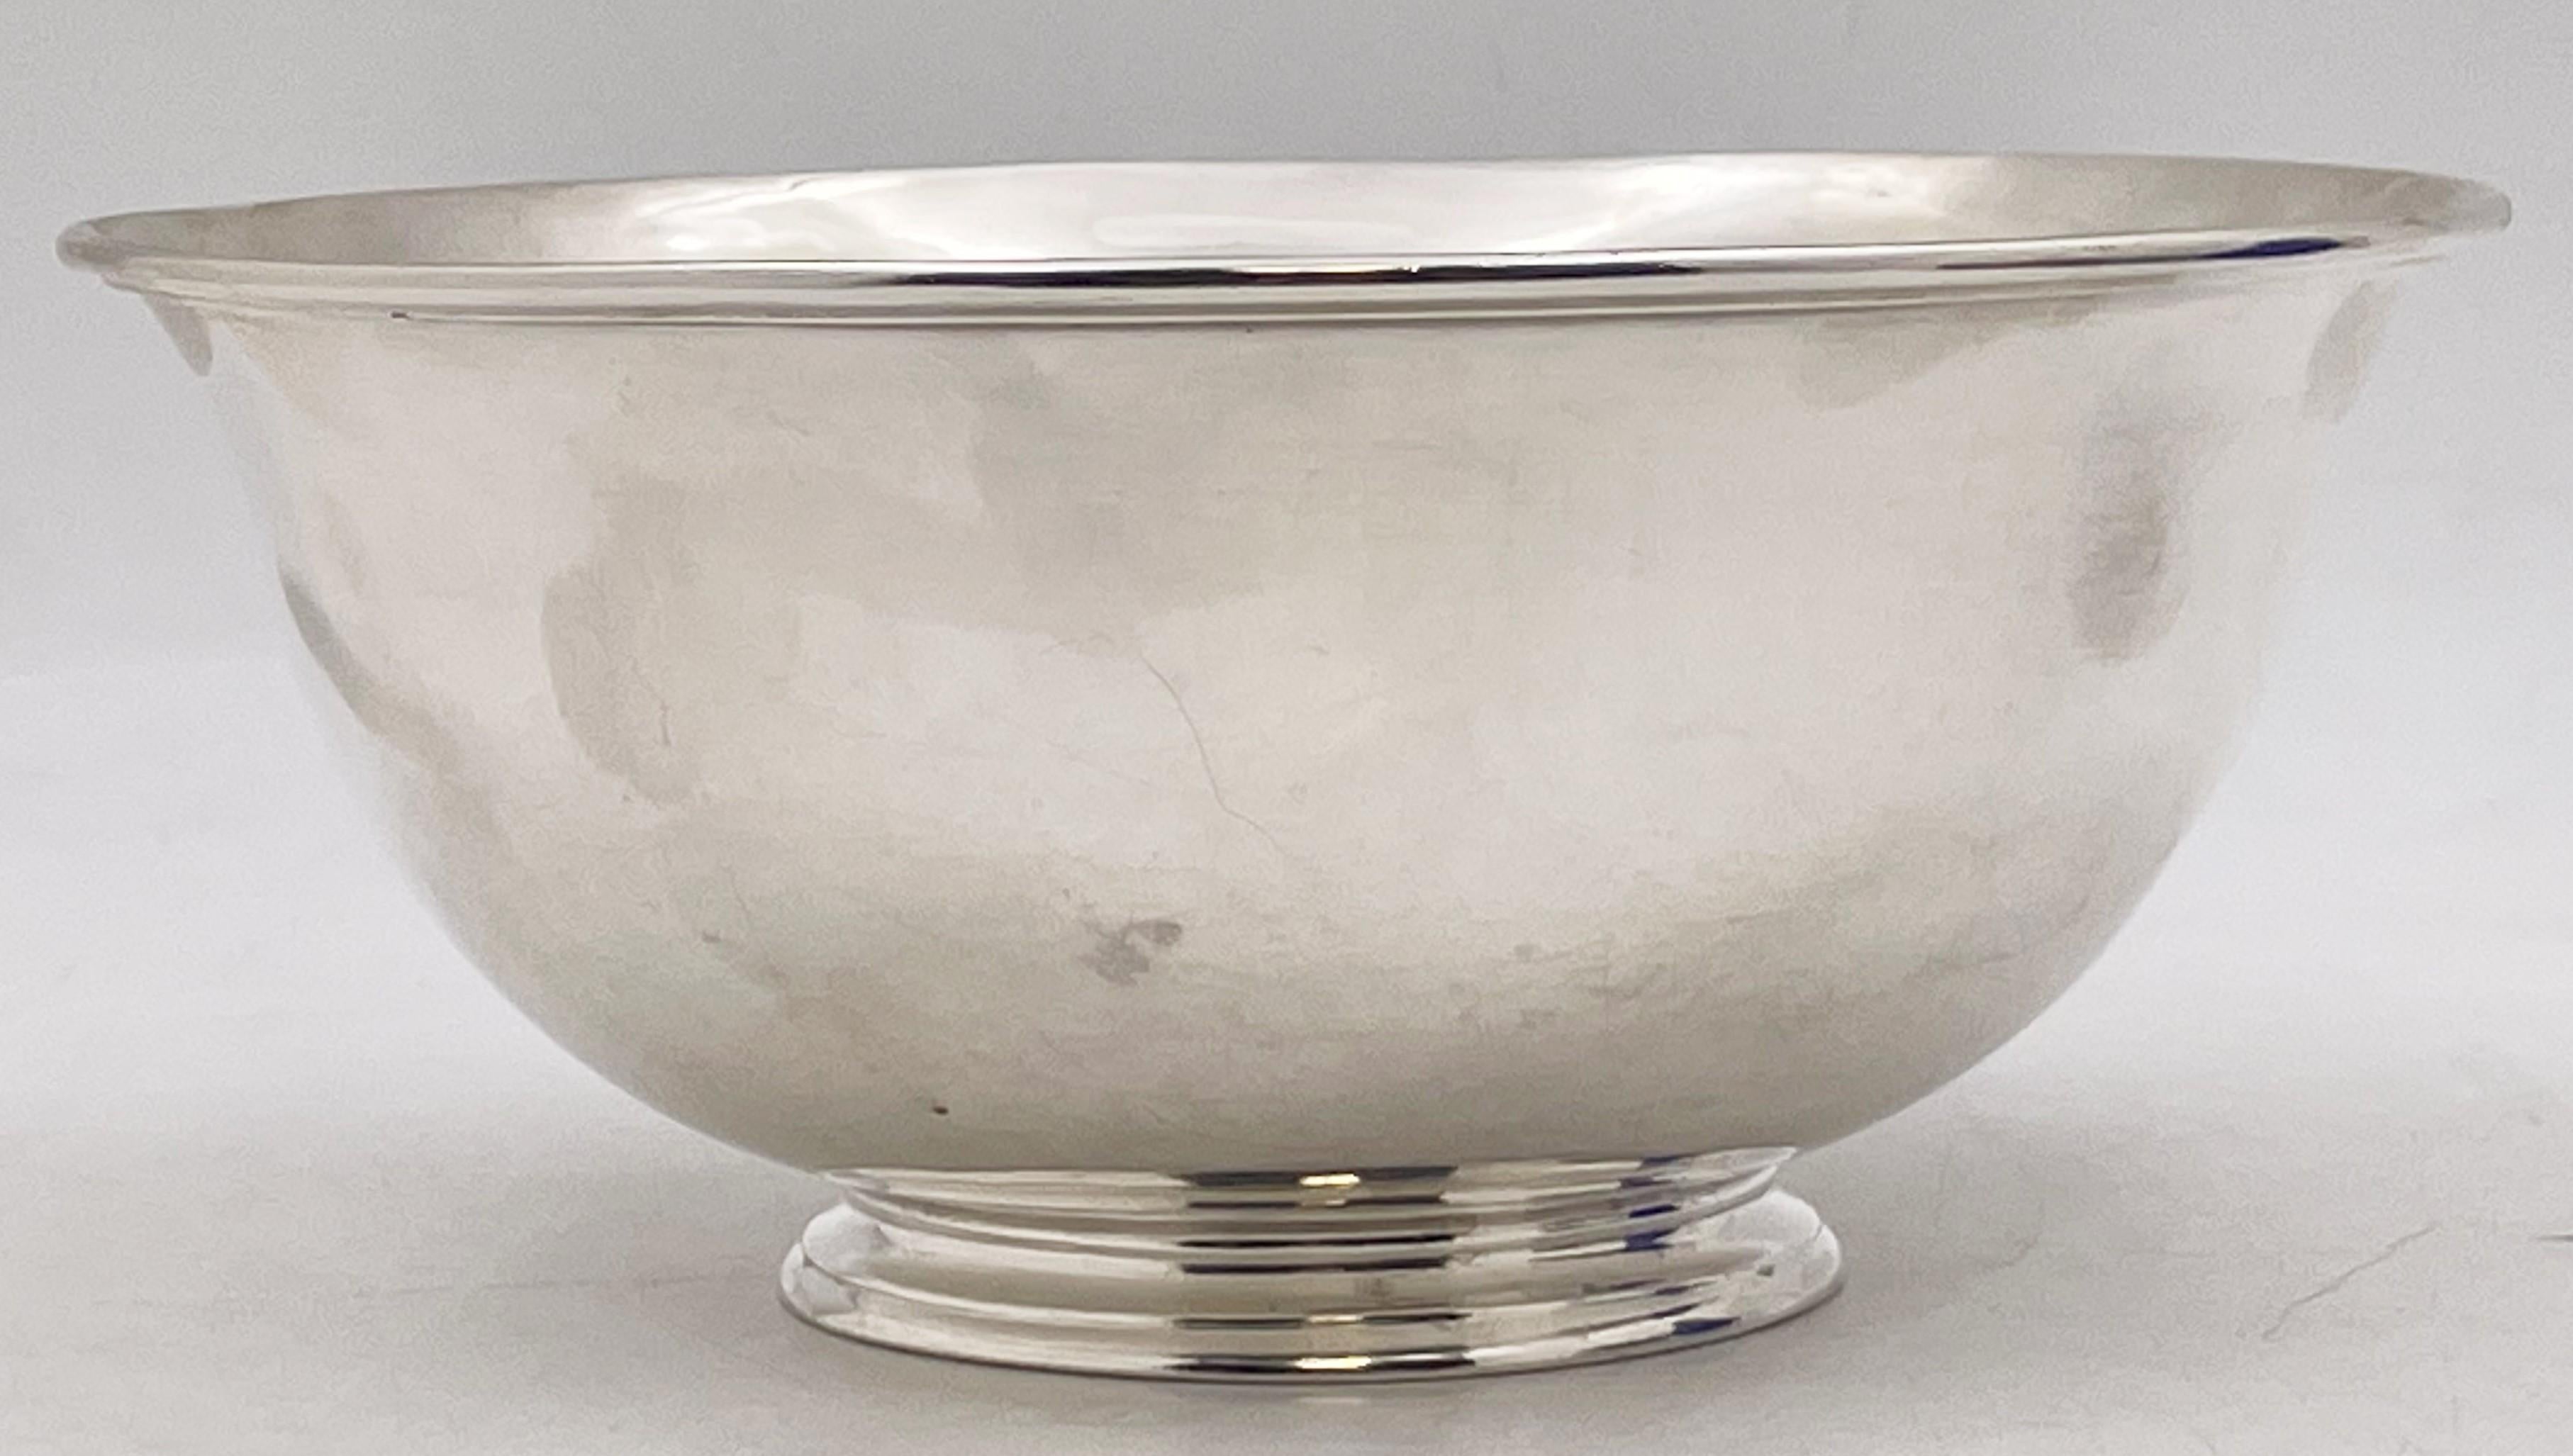 Arthur Stone sterling silver bowl in Arts & Crafts style from the early 20th century, with an elegant, geometric design. It measures 7 1/4'' in diameter by 3 1/4'' in height, weighs 14.1 troy ounces, and bears hallmarks as shown. 

Arthur J. Stone